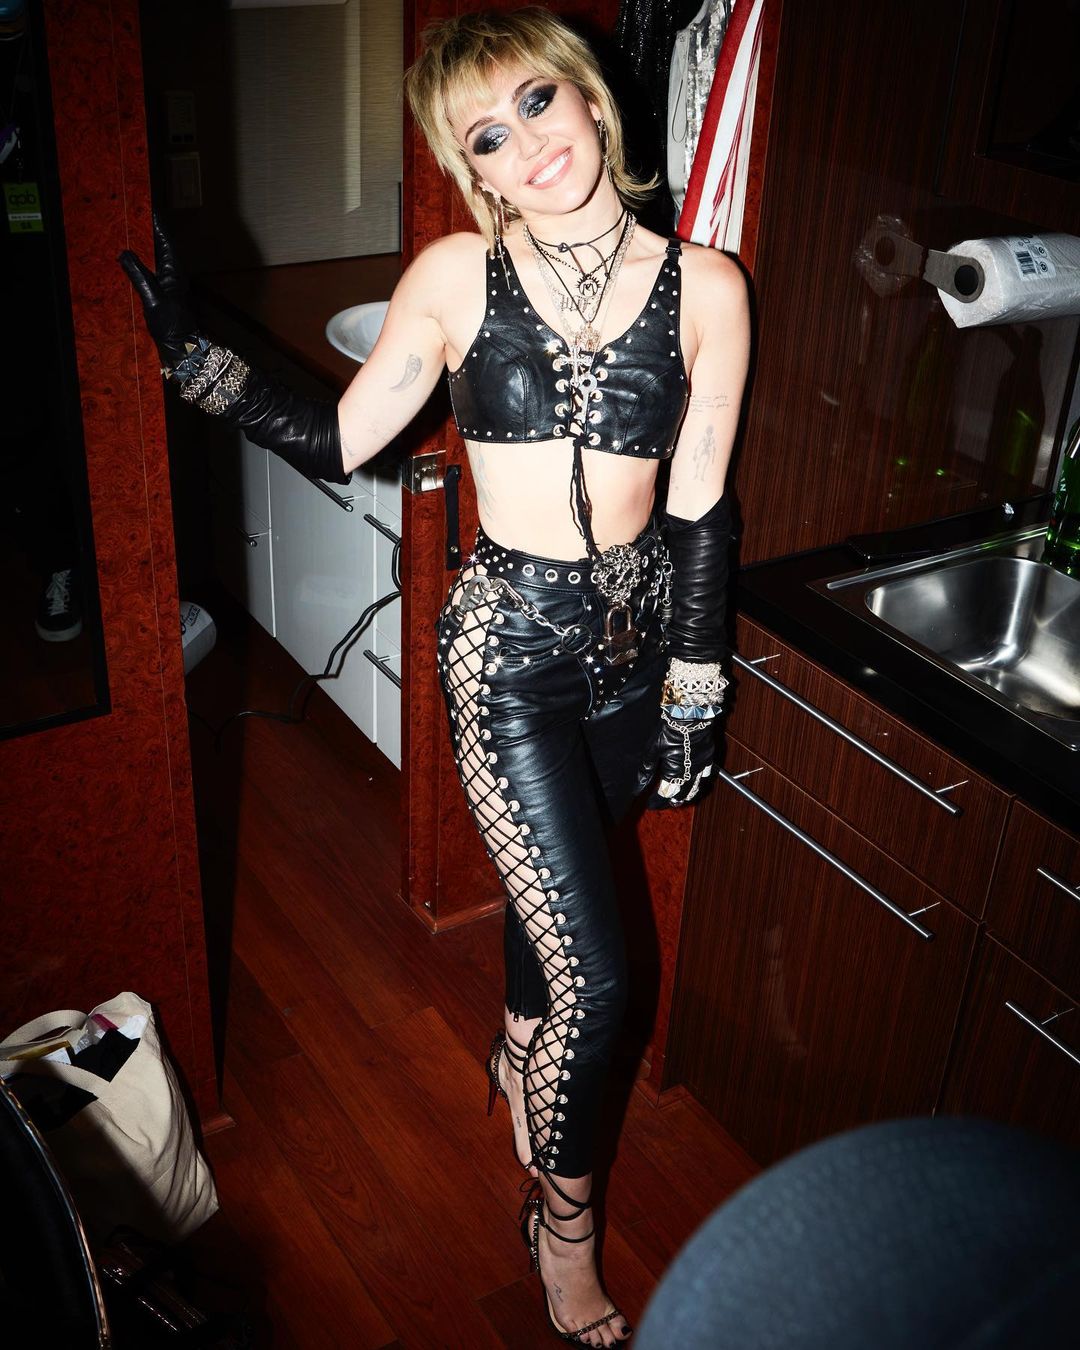 Miley Cyrus Training for Her Tailgate Party! - Photo 2